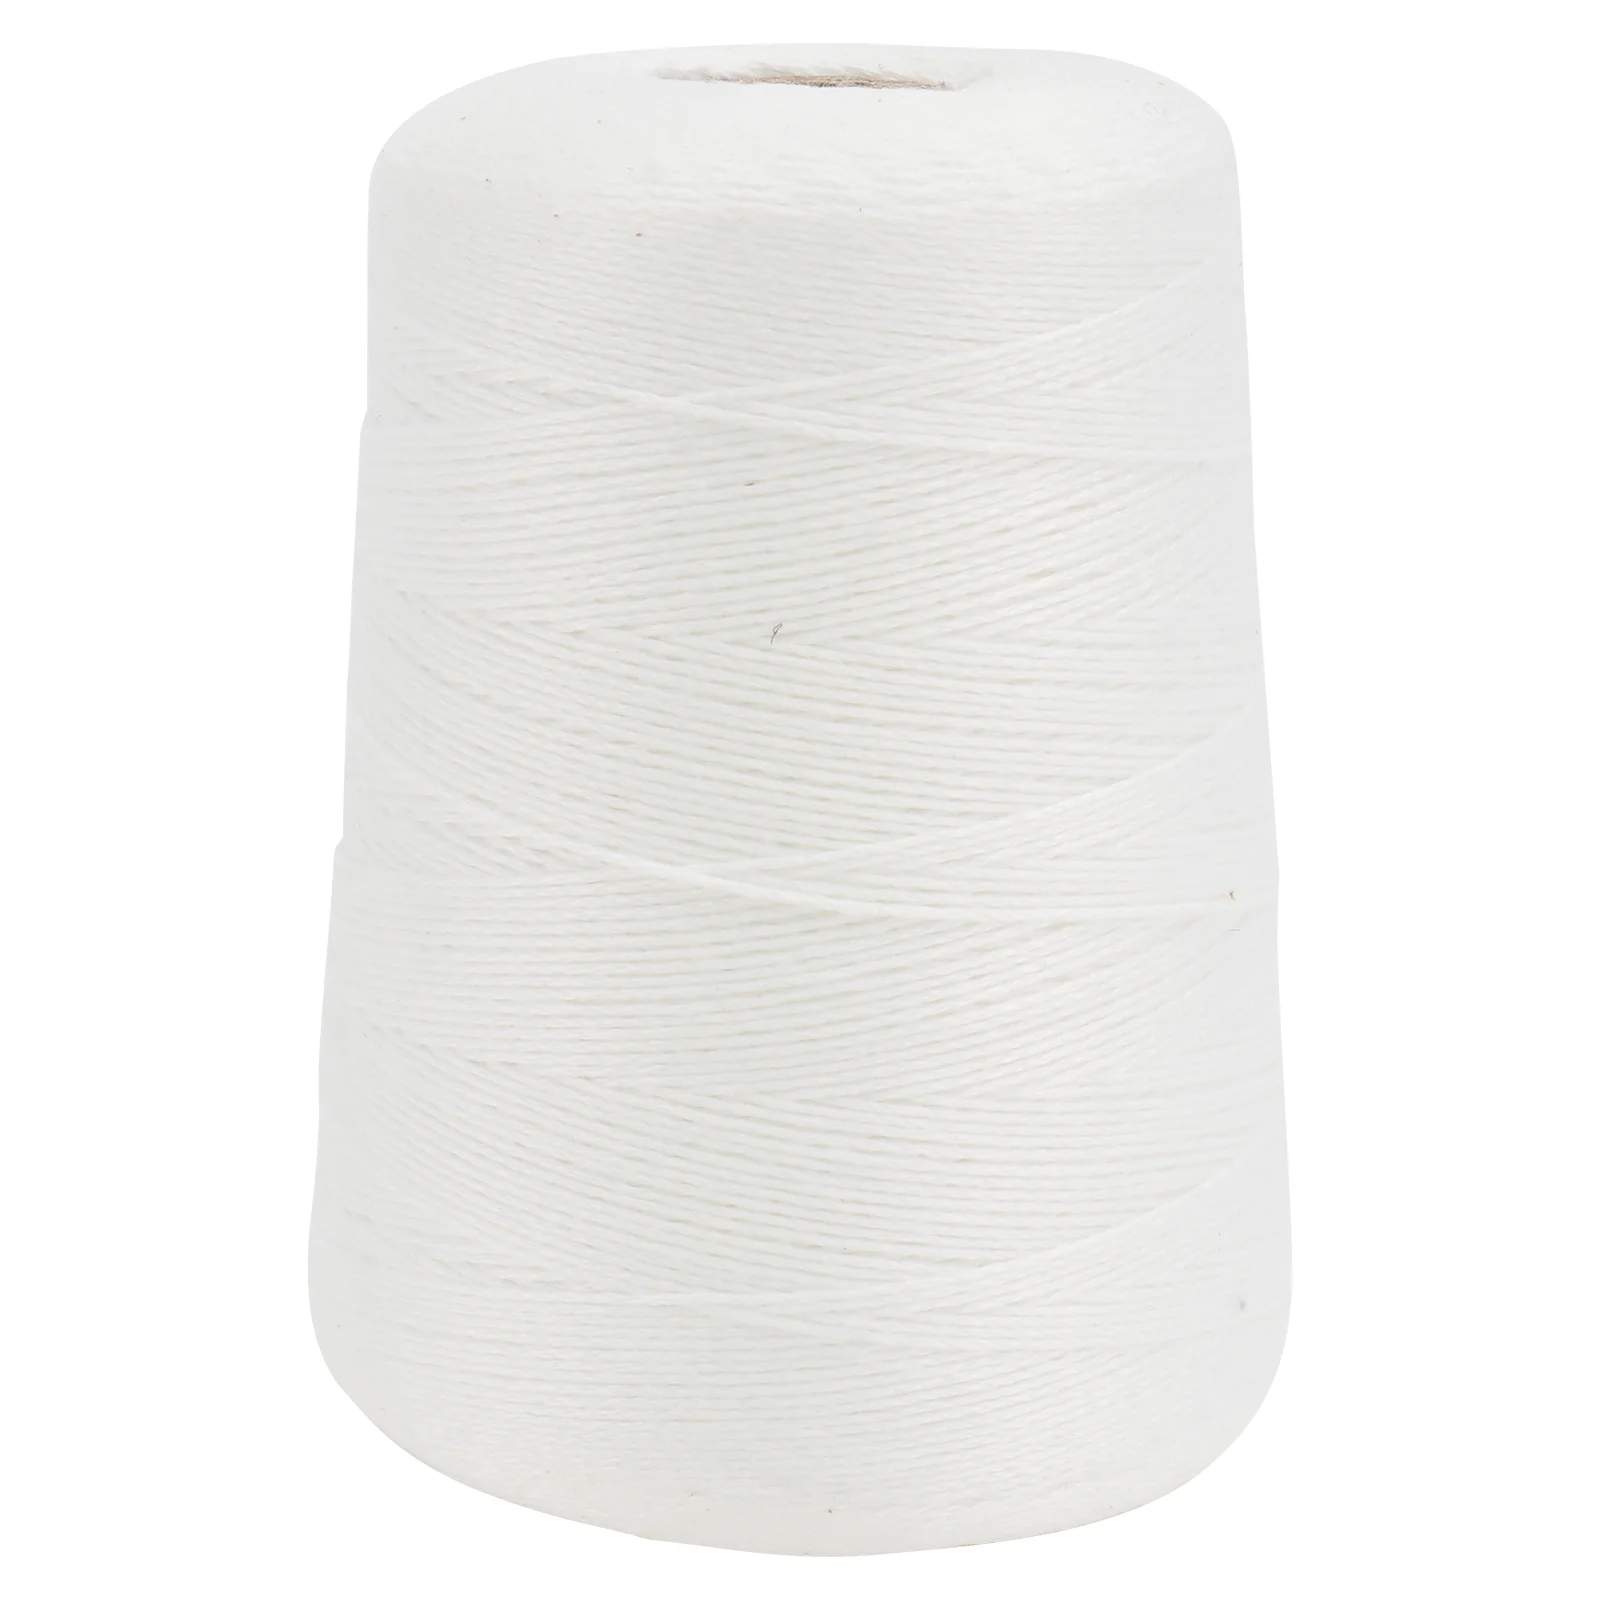 

1 Roll Bakers Twine Safe Woven Cotton Cooking String 500m for Trussing Tying Poultry Meat Making Sausage DIY Crafts Bundle